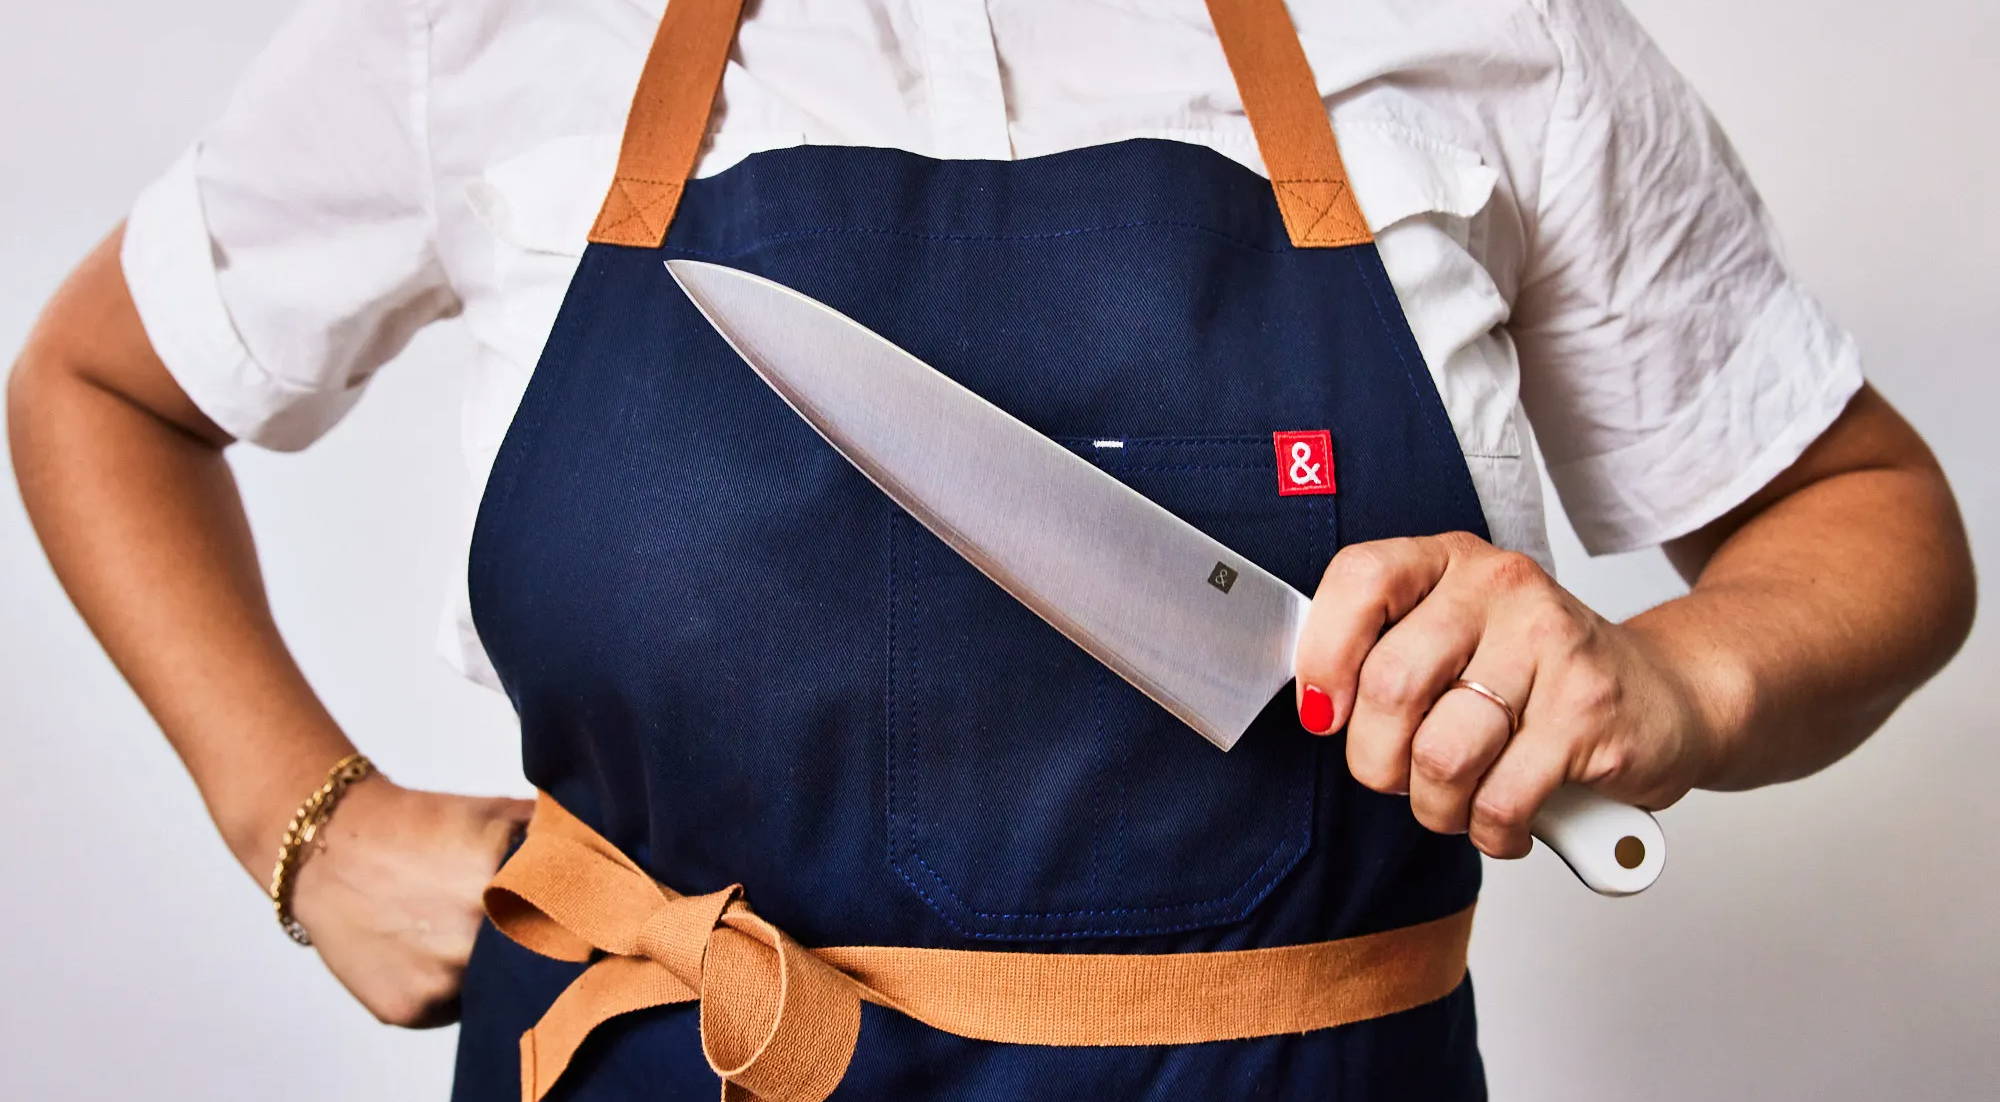 Behold! Our BRAND NEW Hedley & Bennett Chef's Knife! Now available in